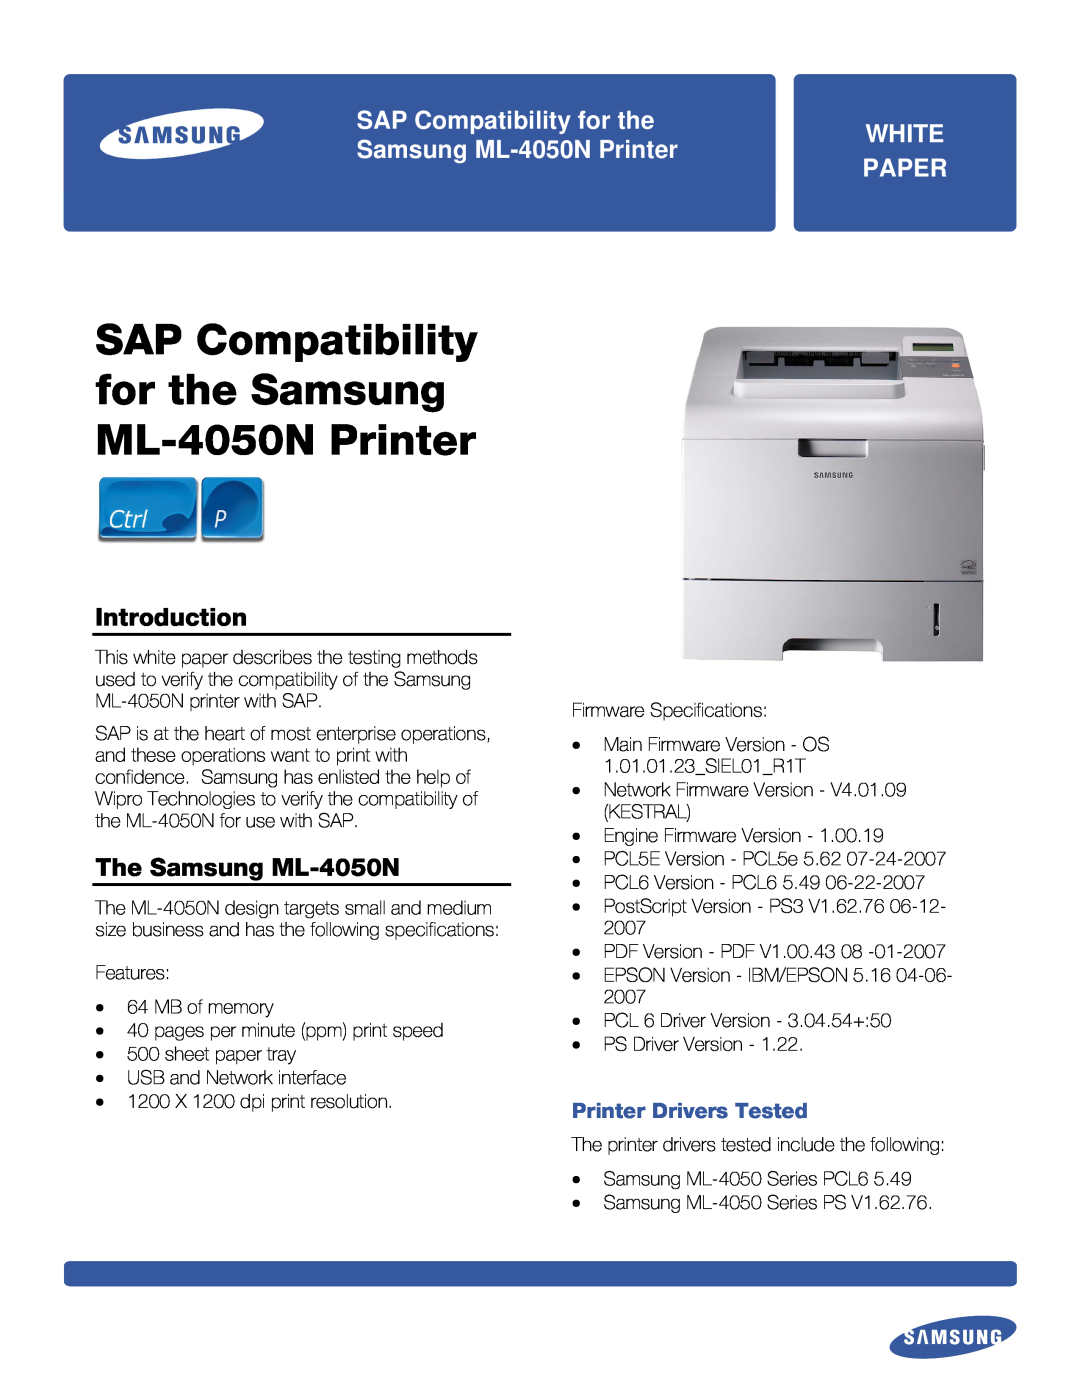 Samsung specifications Introduction, The Samsung ML-4050N, Printer Drivers Tested, SAP Compatibility for the, White 